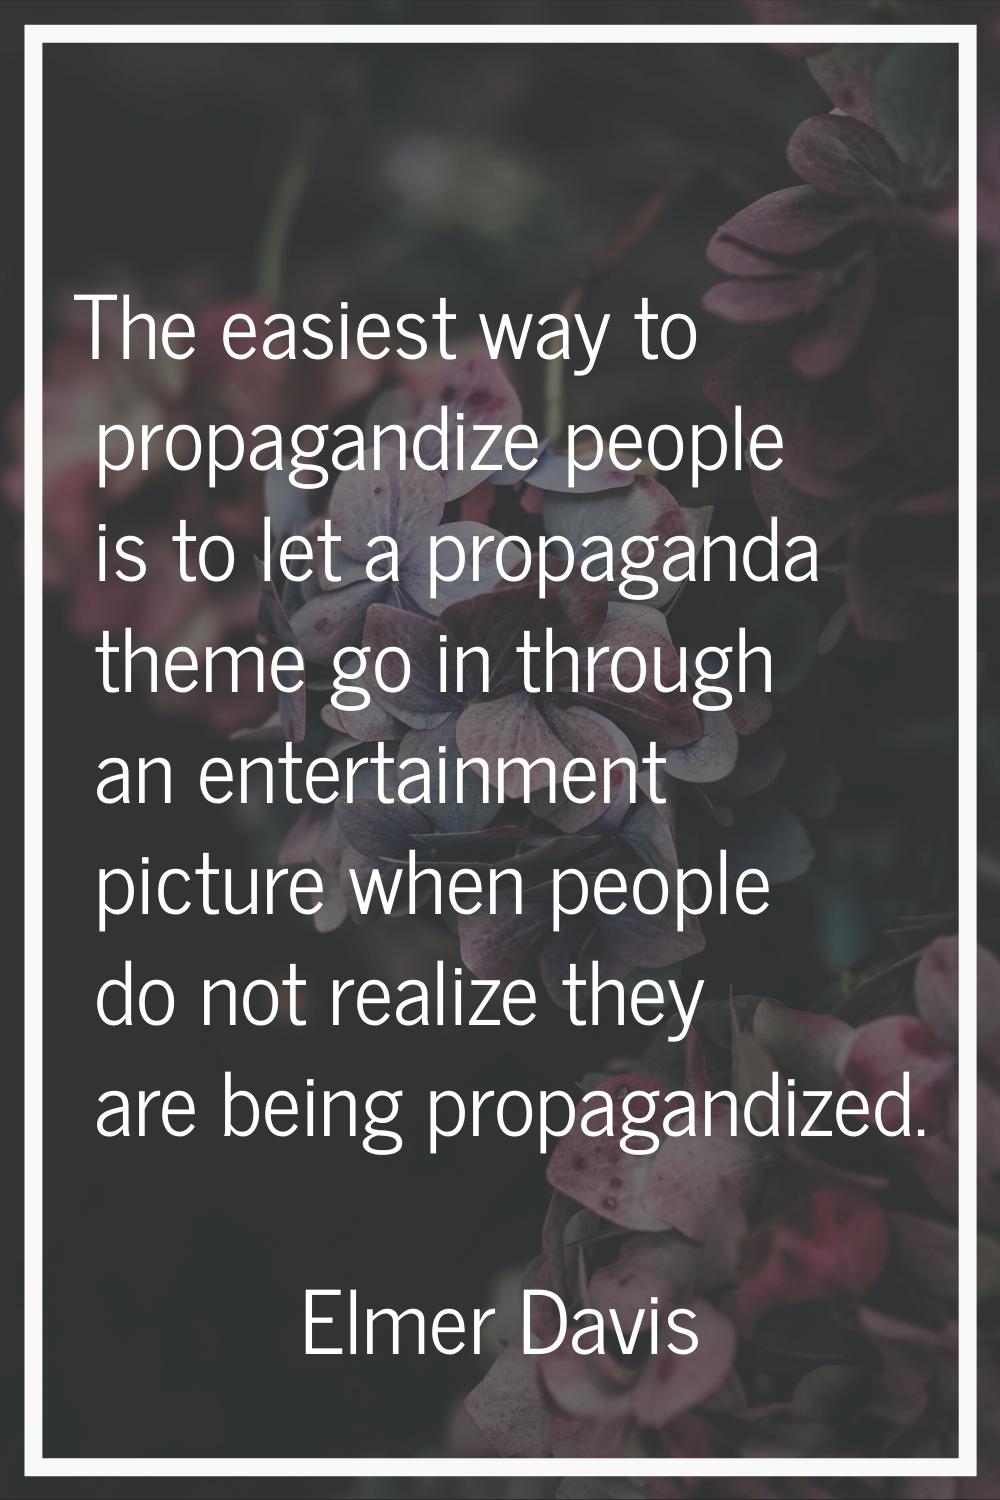 The easiest way to propagandize people is to let a propaganda theme go in through an entertainment 